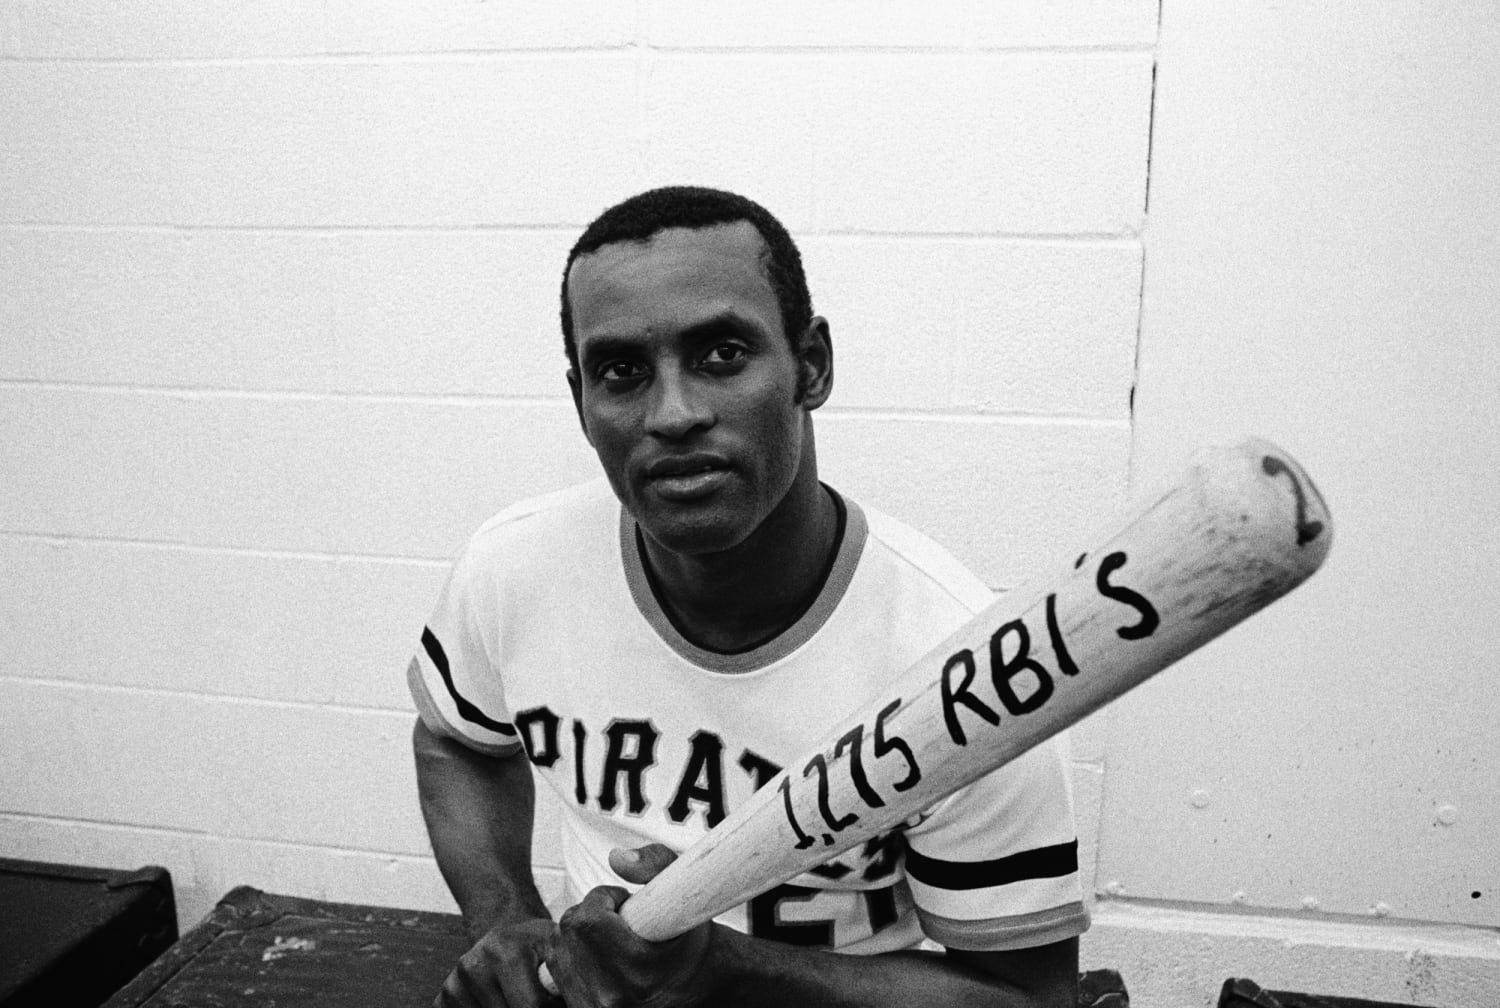 Roberto Clemente book approved for use in Florida public schools